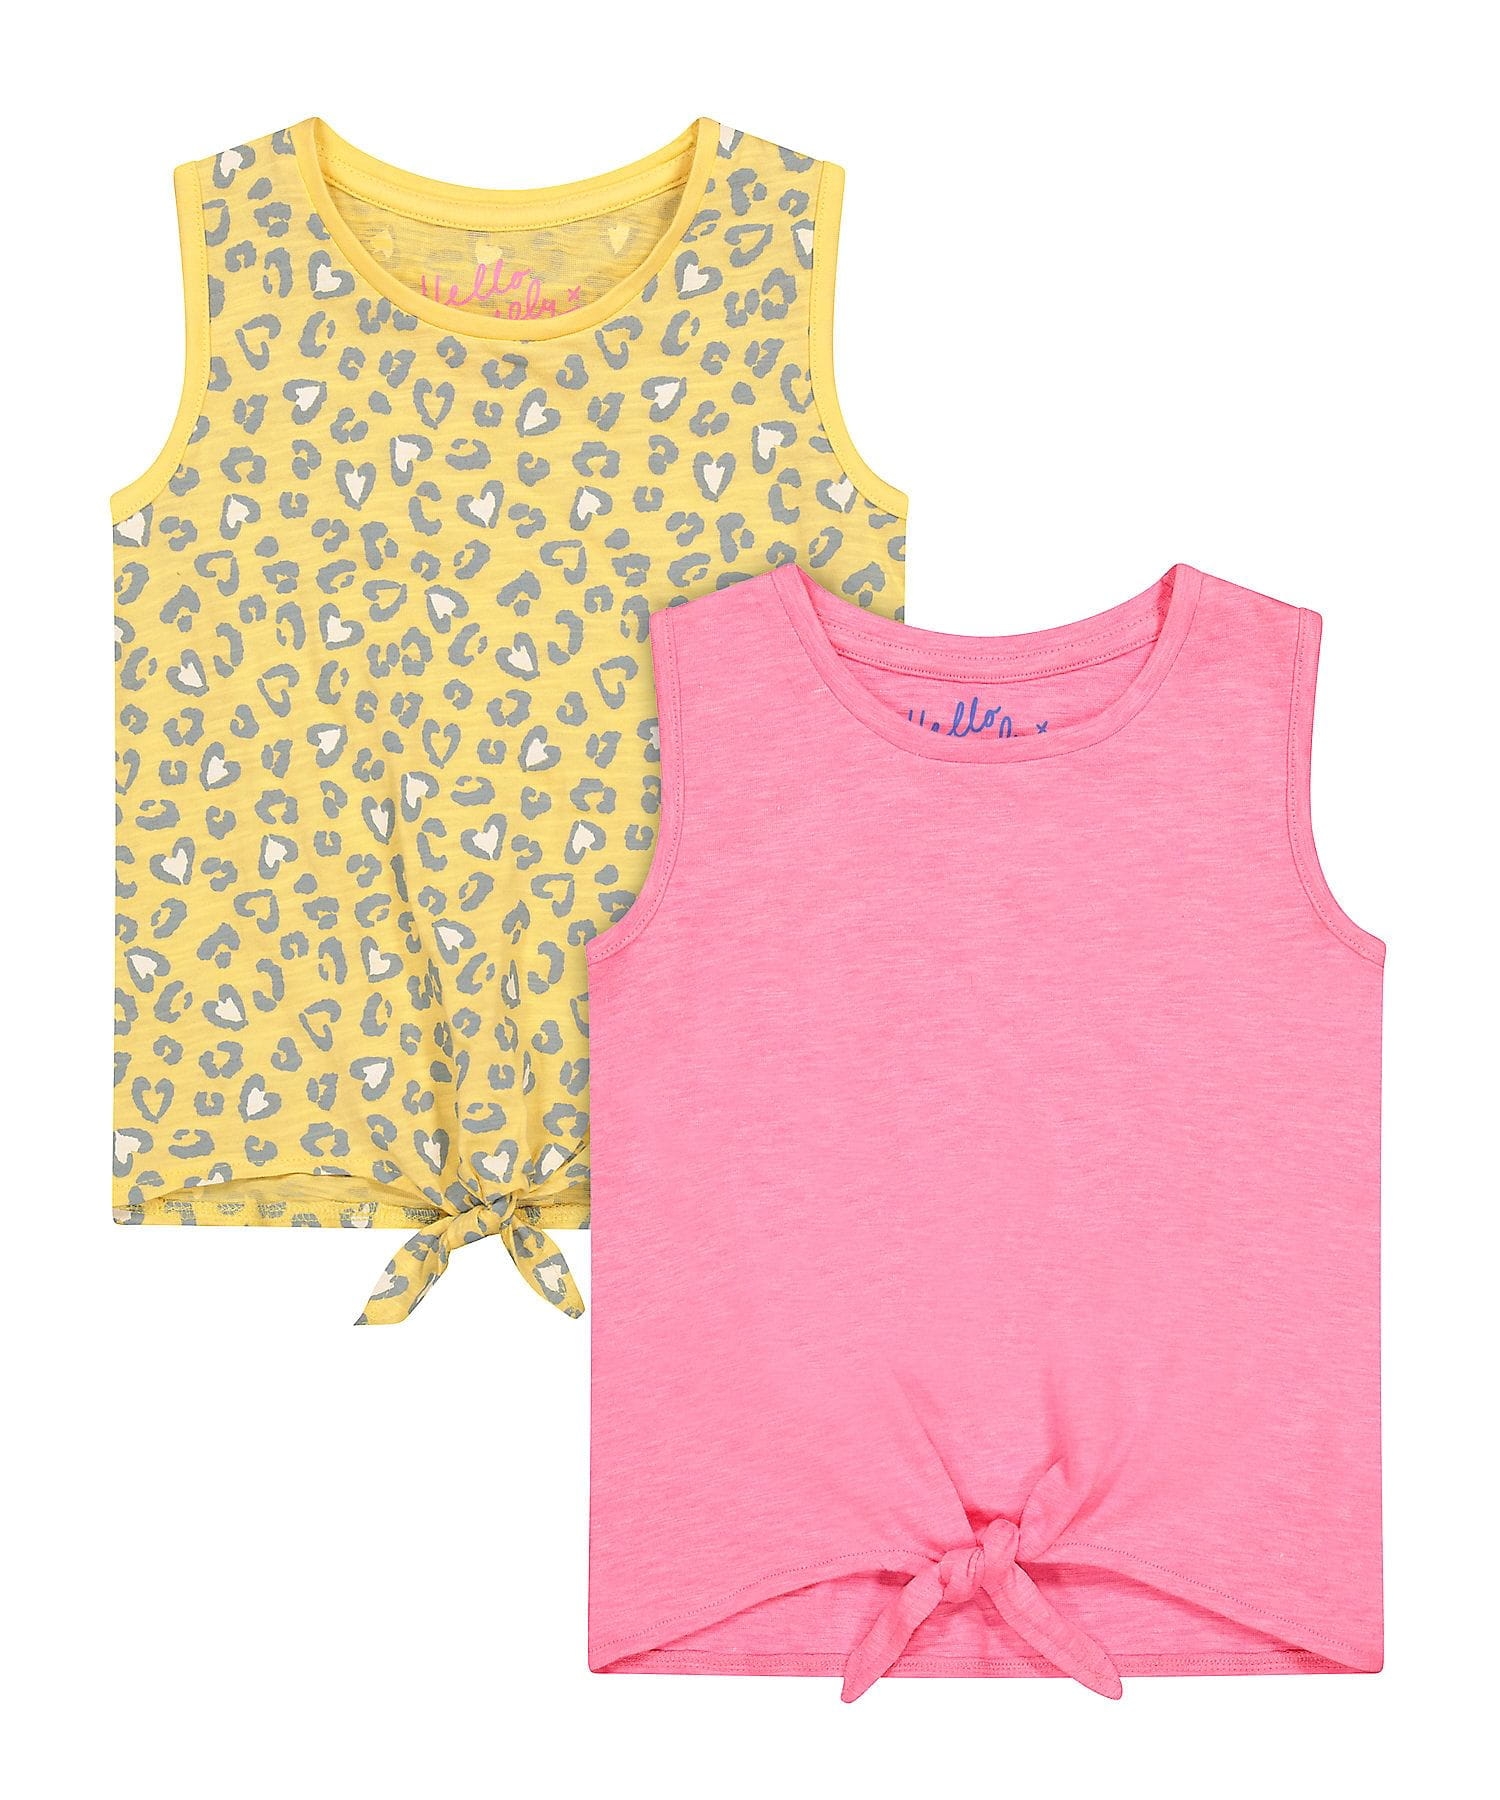 Mothercare | Girls Sleeveless Round Neck T-shirts  - Pack Of 2 - Multicolor 0